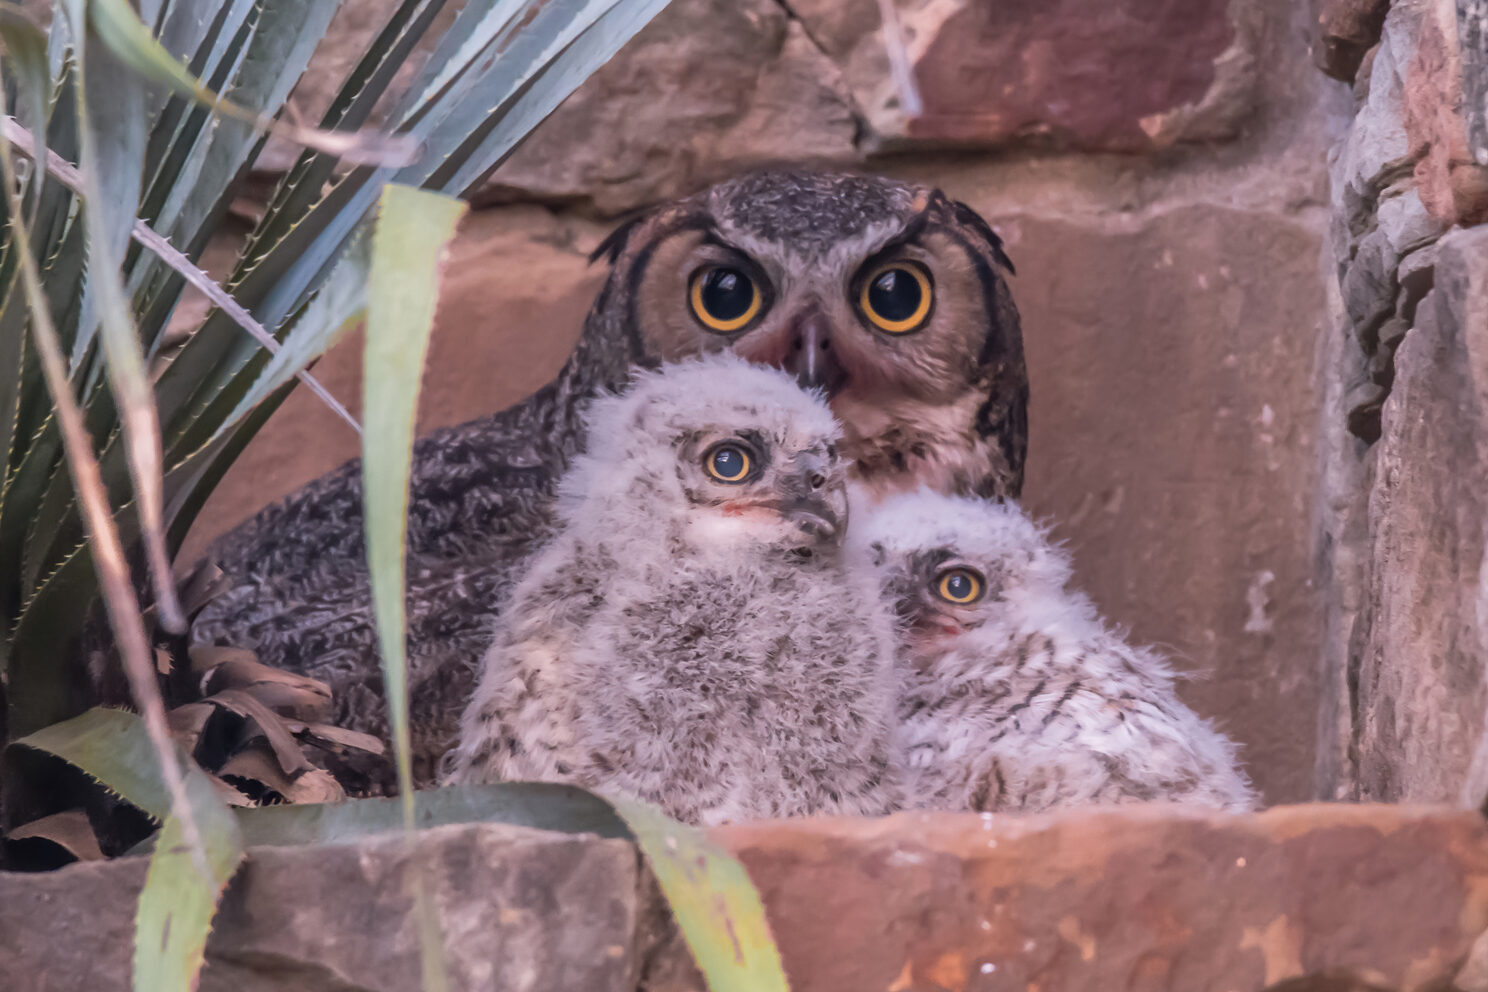 Athena the Great Horned Owl guarding two owlets.